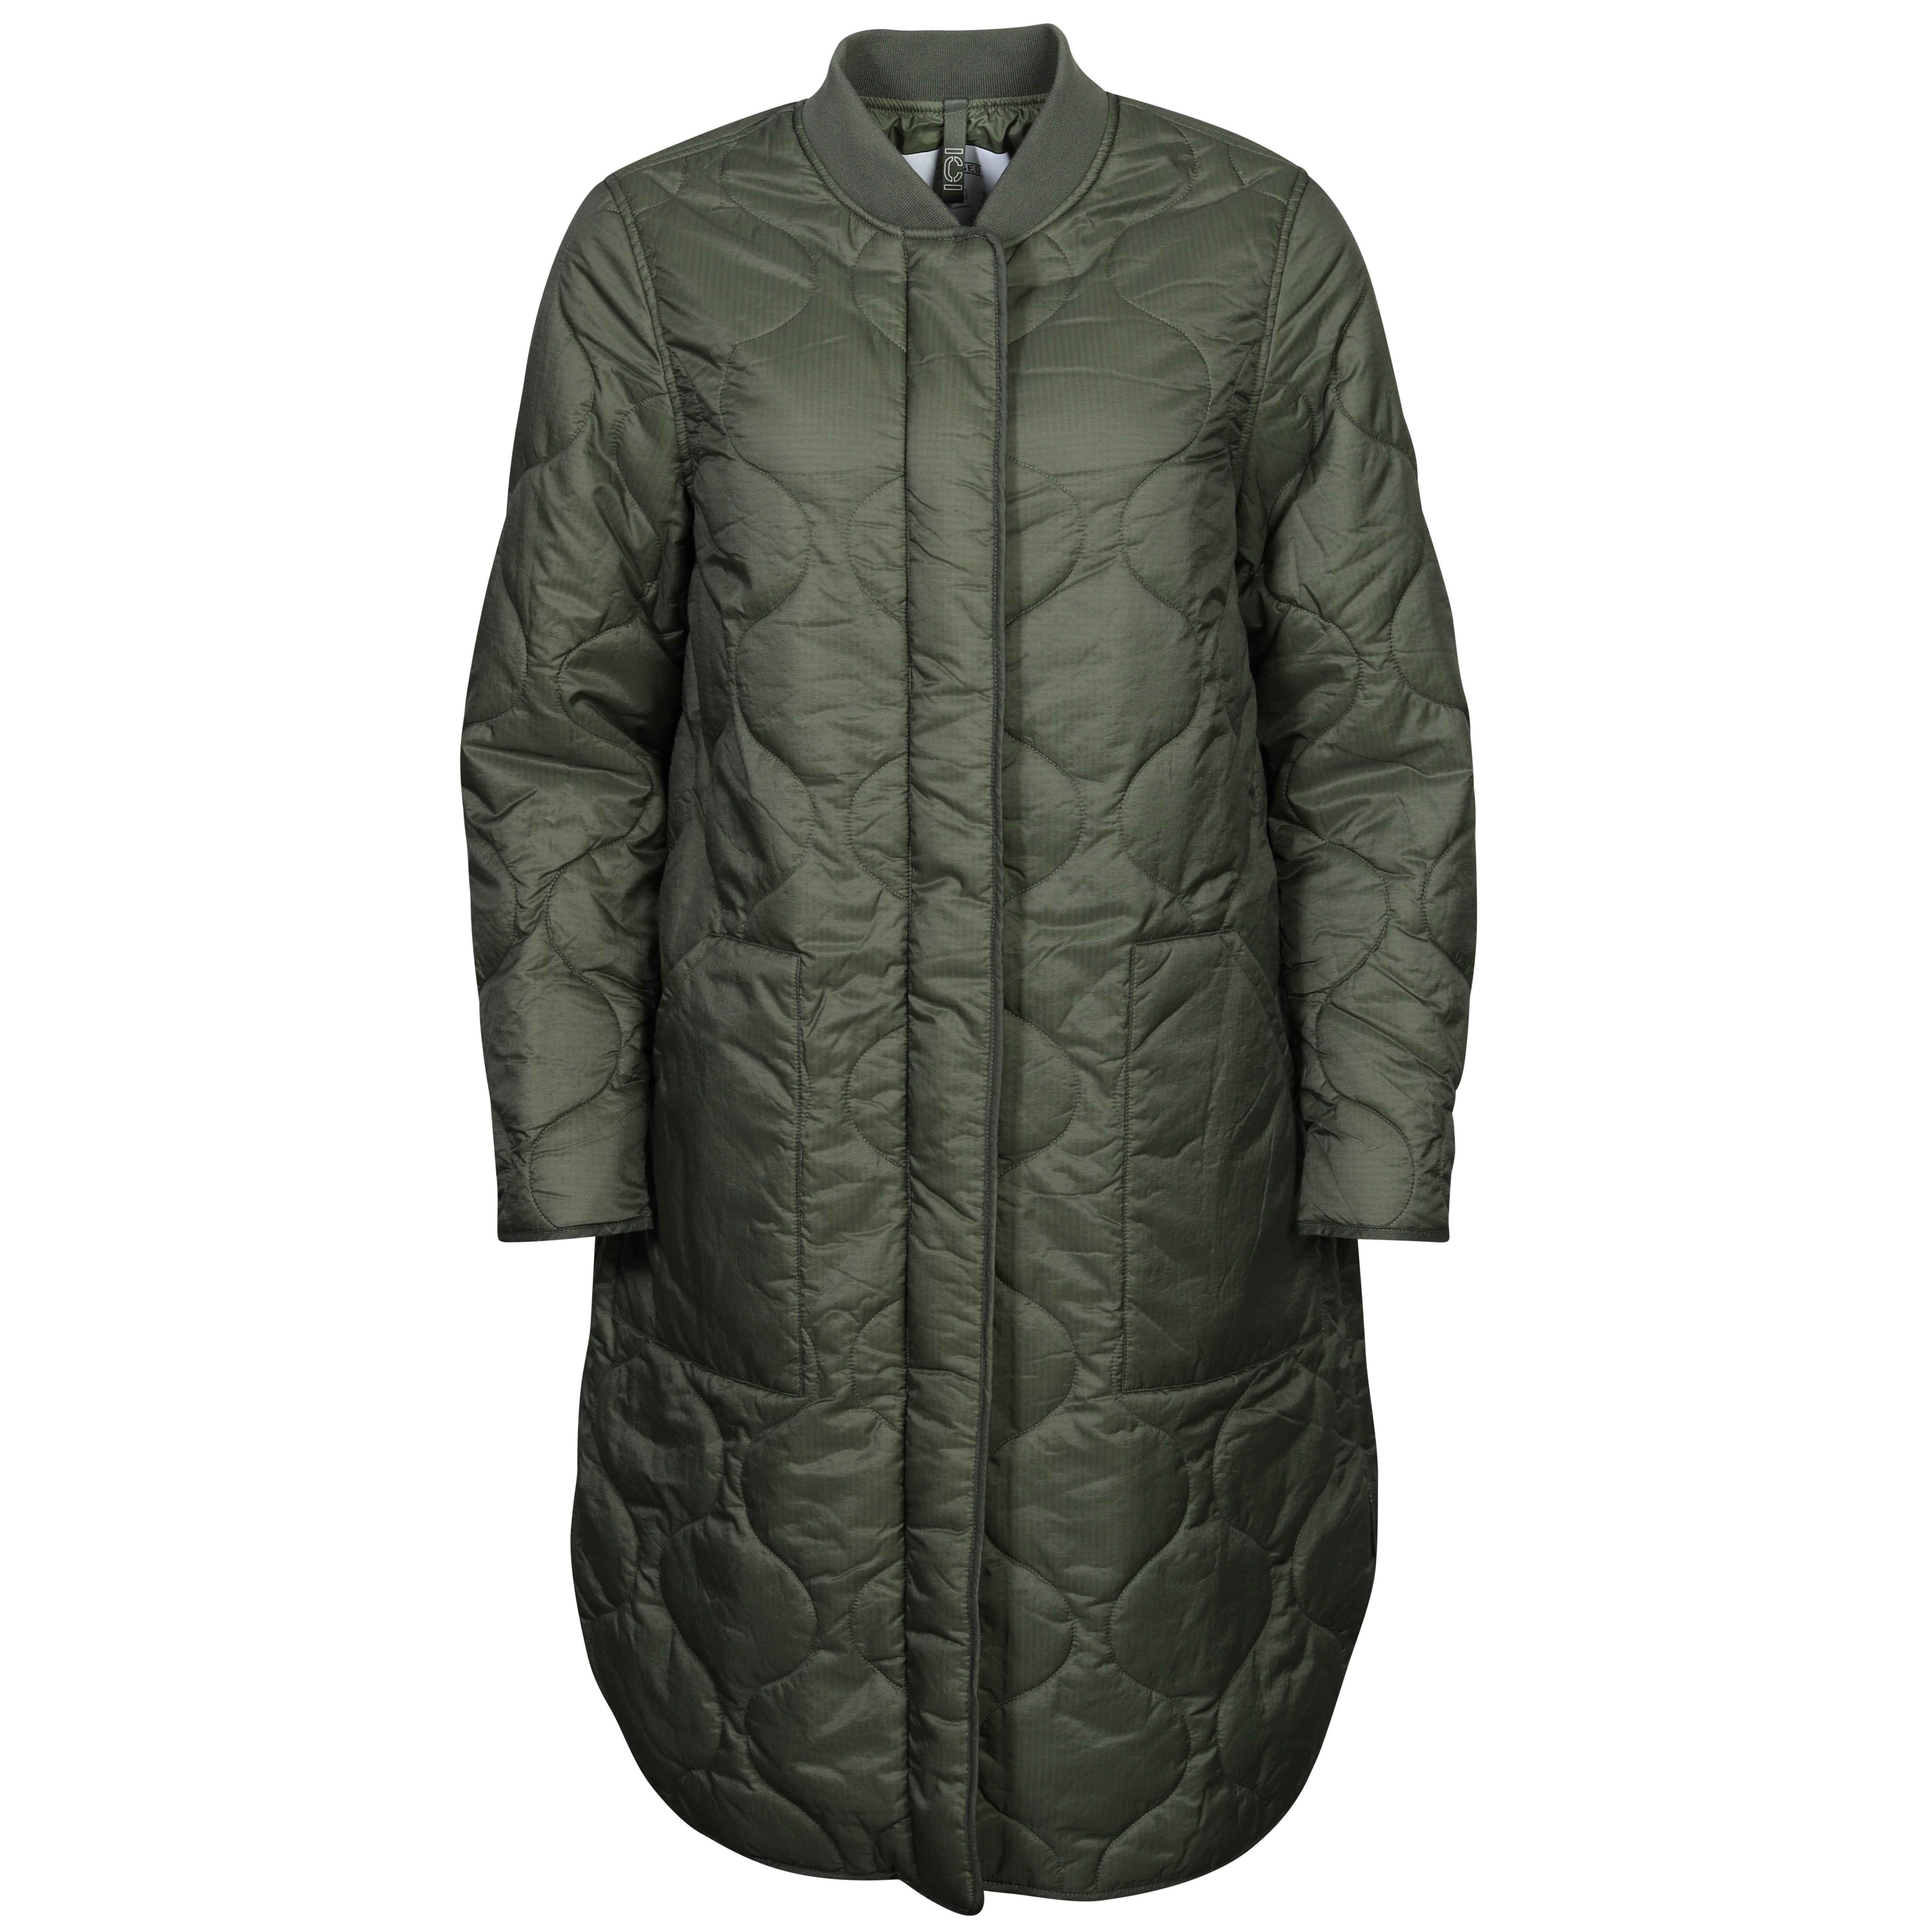 Closed Light Weight Nylon Coat in Army Green S